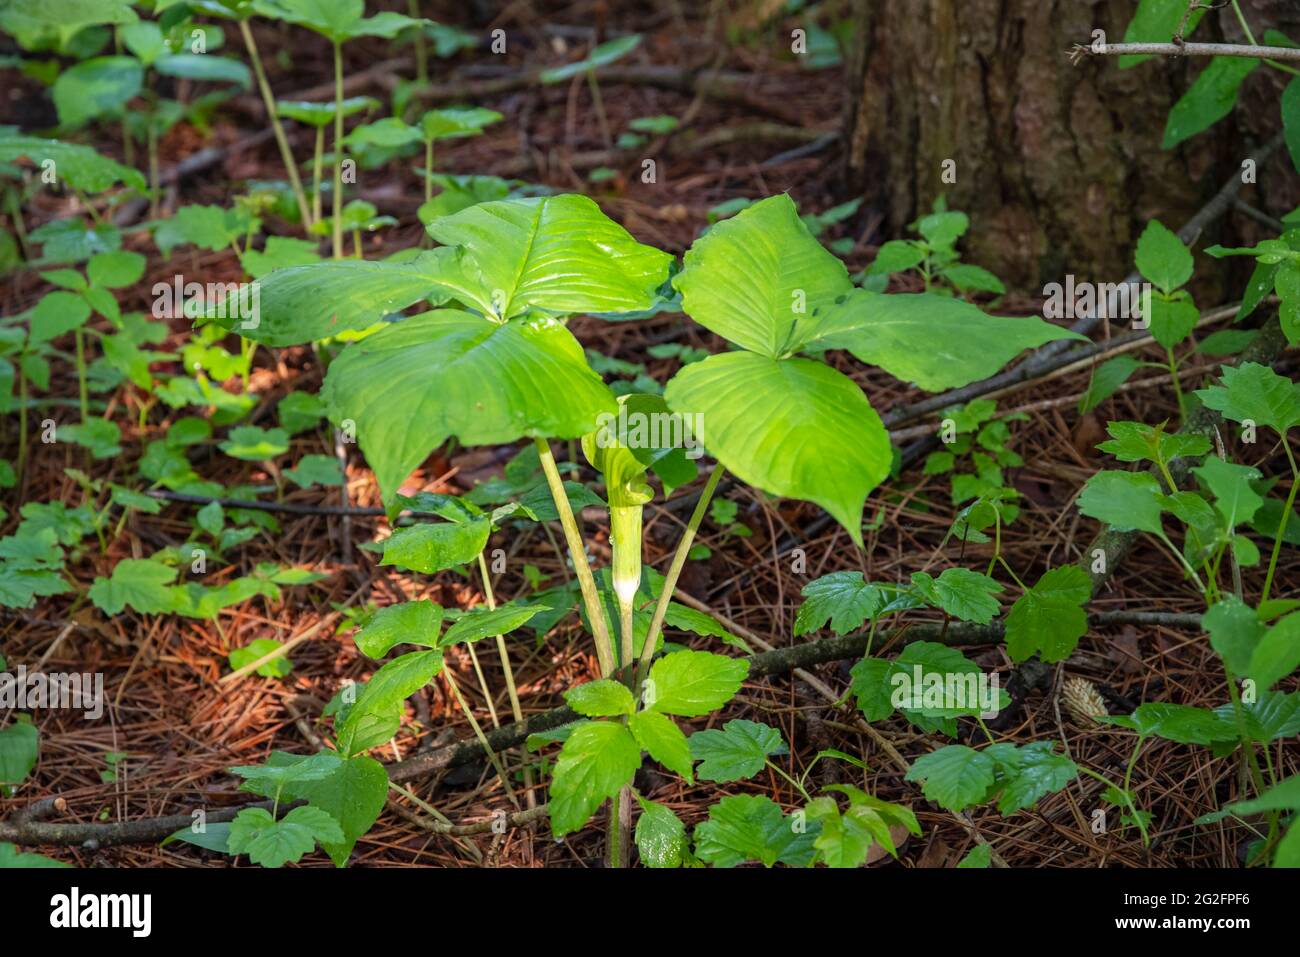 Jack in the pulpit, Arisaema triphyllum plant with mature leaves, a native North American wildflower. Stock Photo